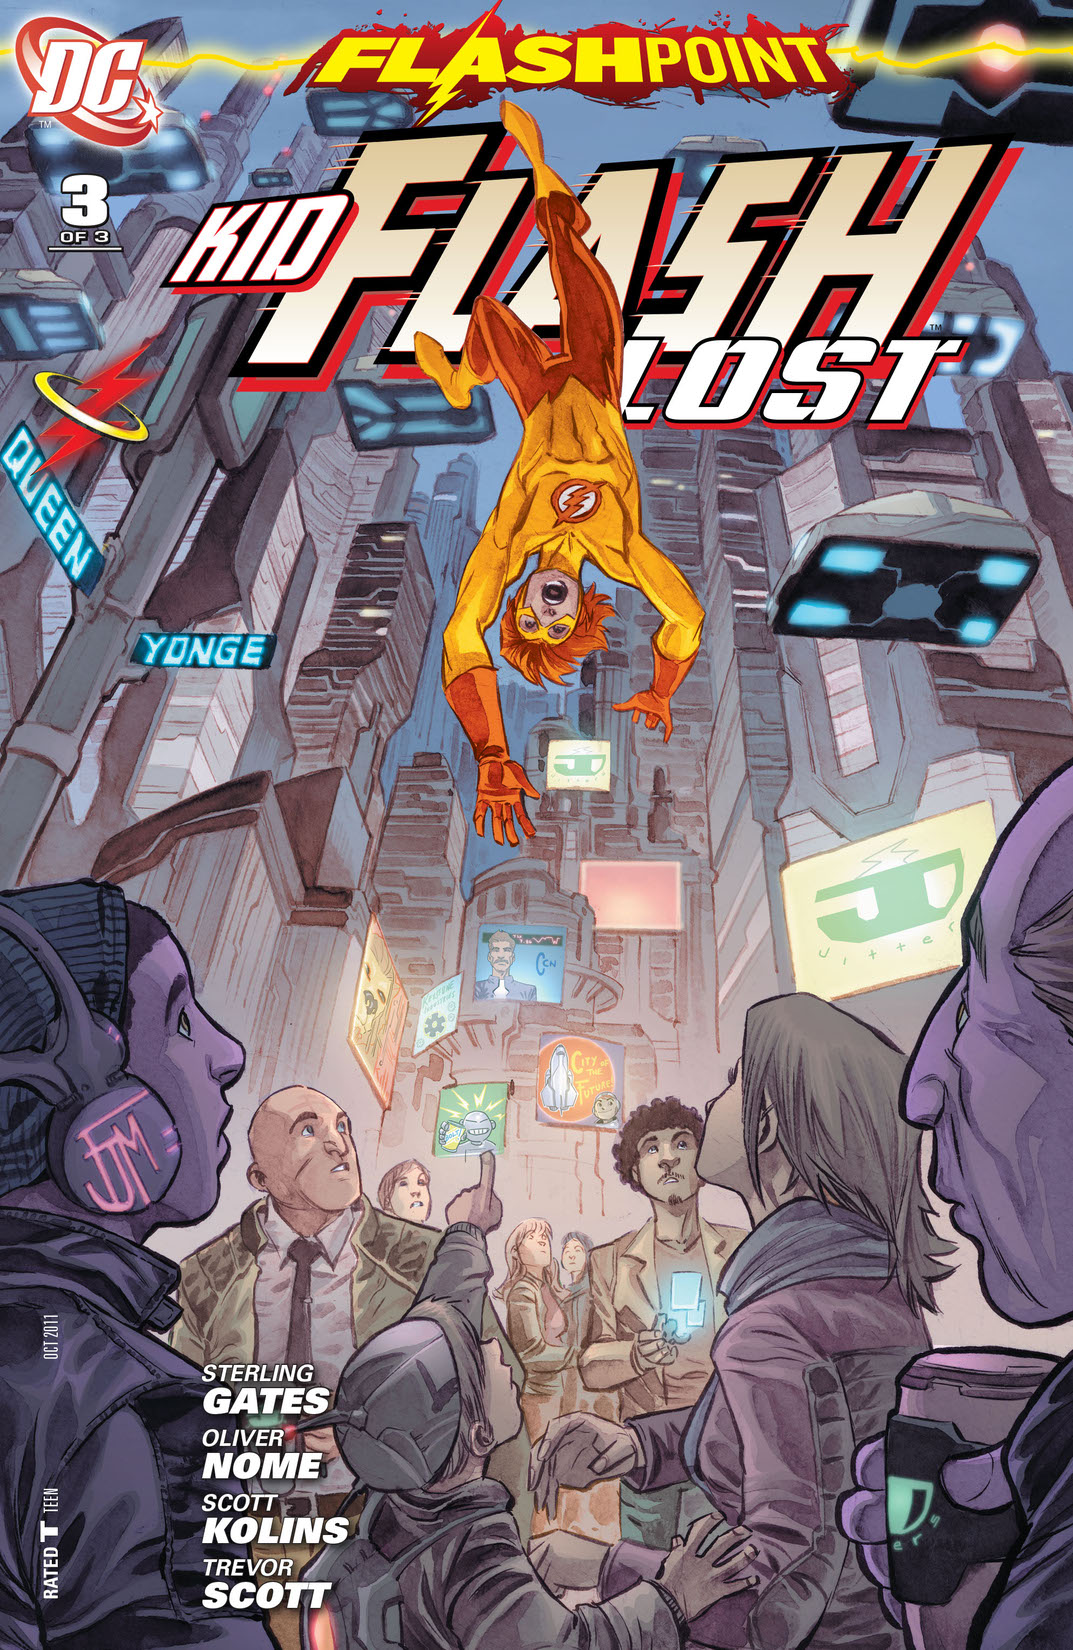 Flashpoint: Kid Flash Lost #3 preview images